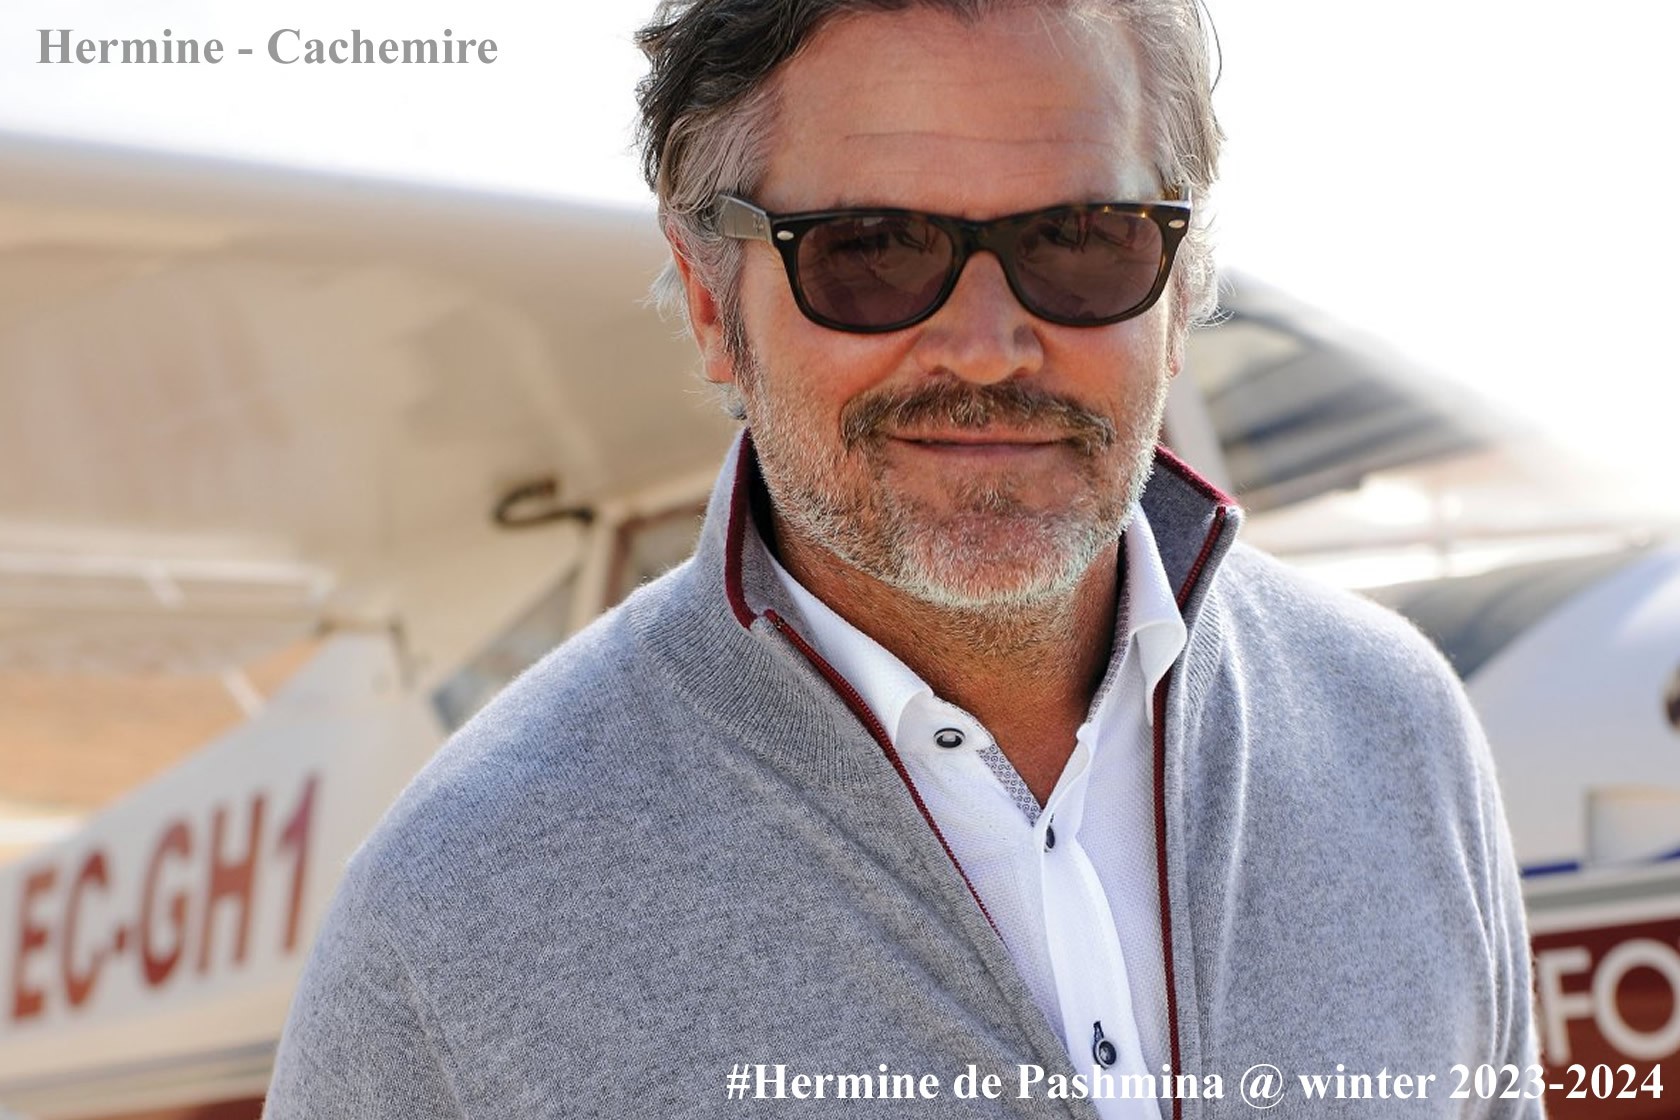 Discover sophistication with our men's cashmere collection by Hermine de Pashmina. From the elegant V-neck to the timeless round neck, to the luxurious turtleneck and the stylish trucker, high-quality cashmere pieces